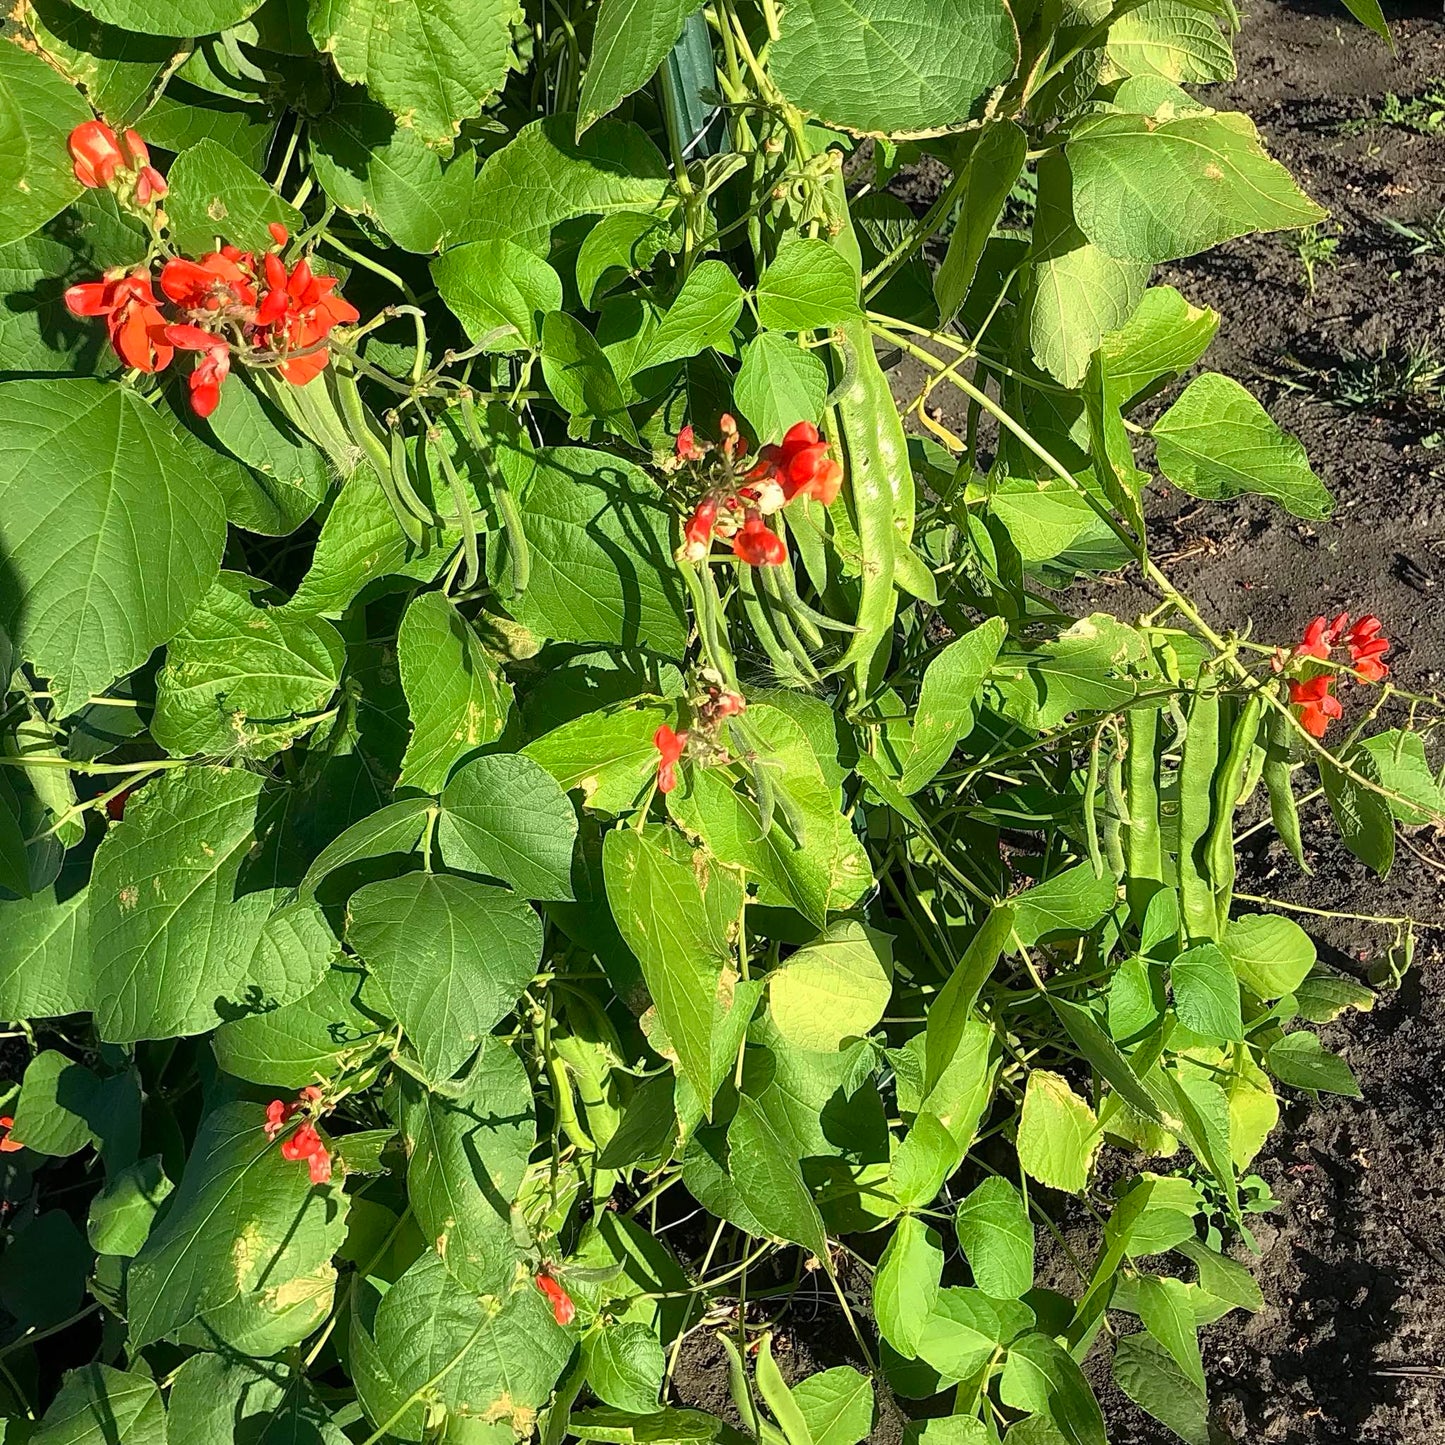 Runner bean plants producing many large pods.